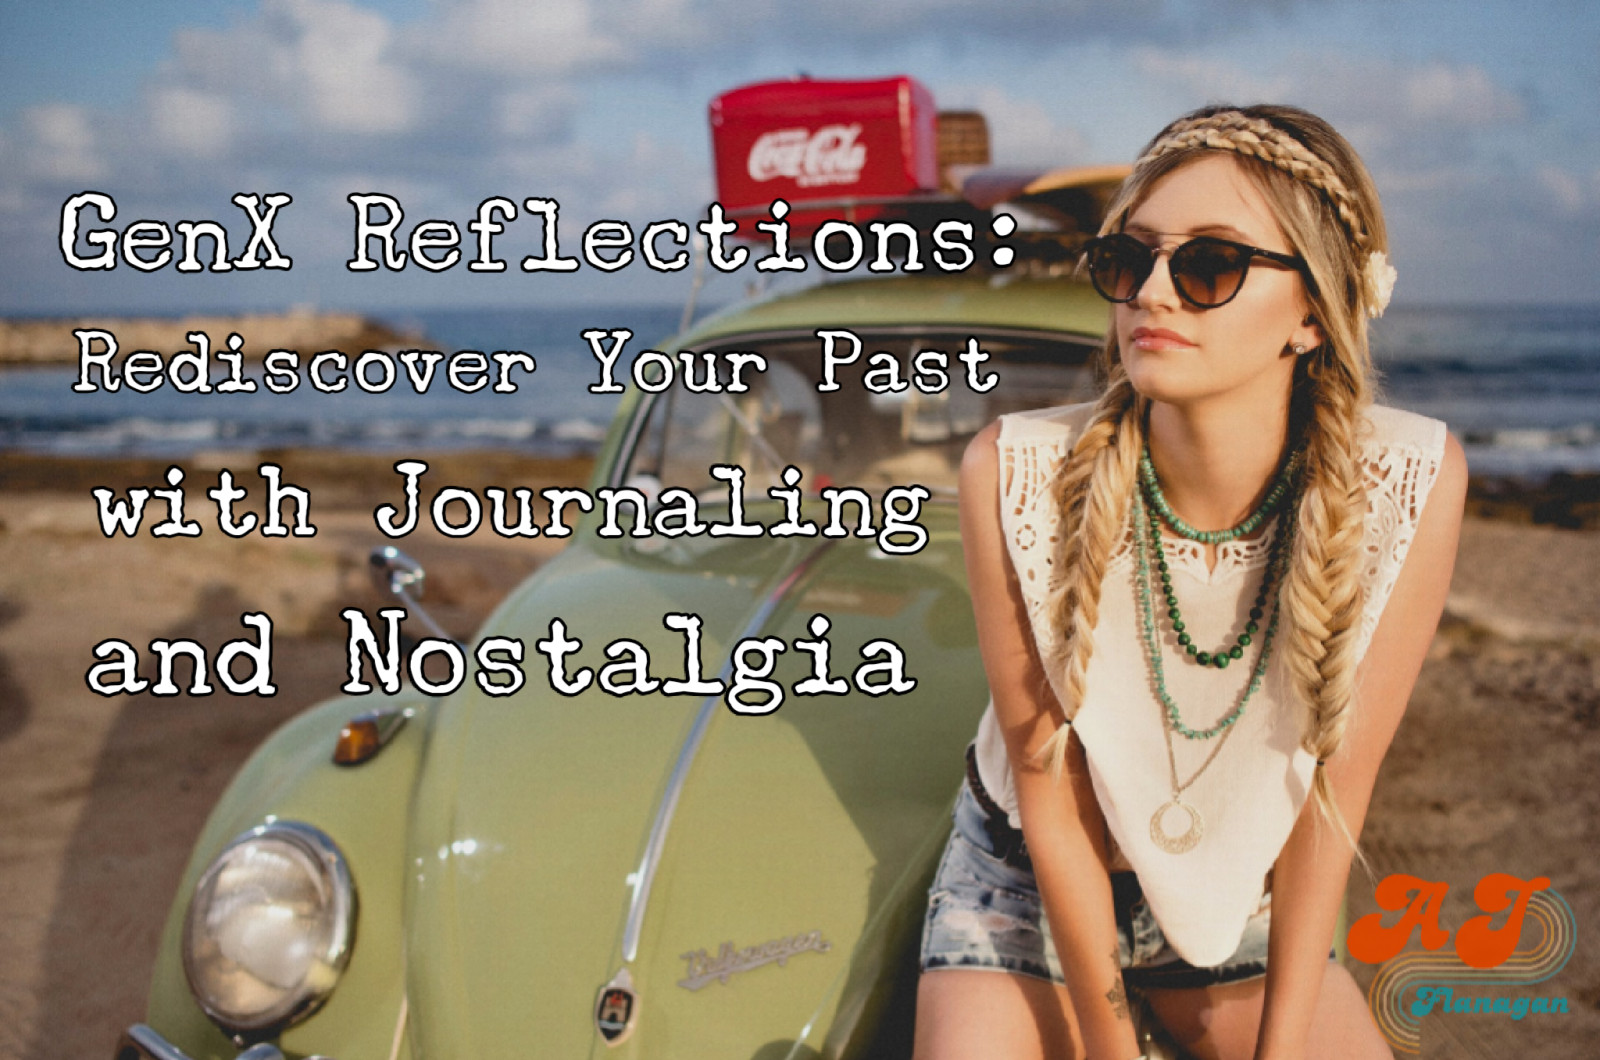 GenX Reflections: Rediscover Your Past with Journaling and Nostalgia